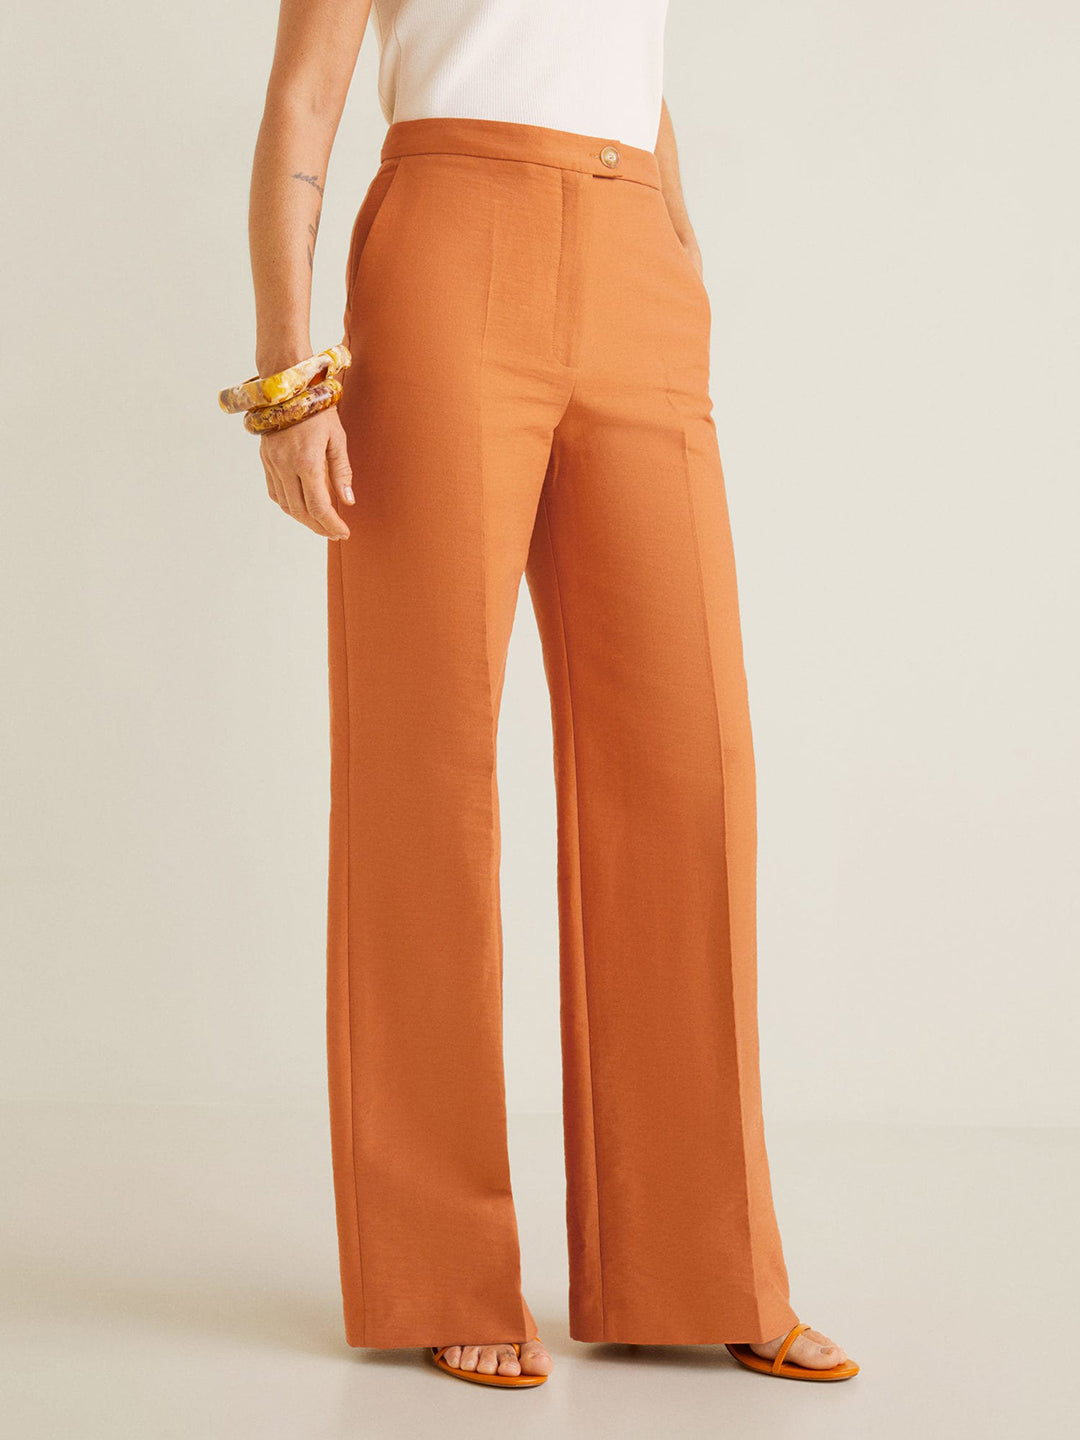 Shop Solid Parallel Trousers with Slip-On Closure Online | R&B UAE